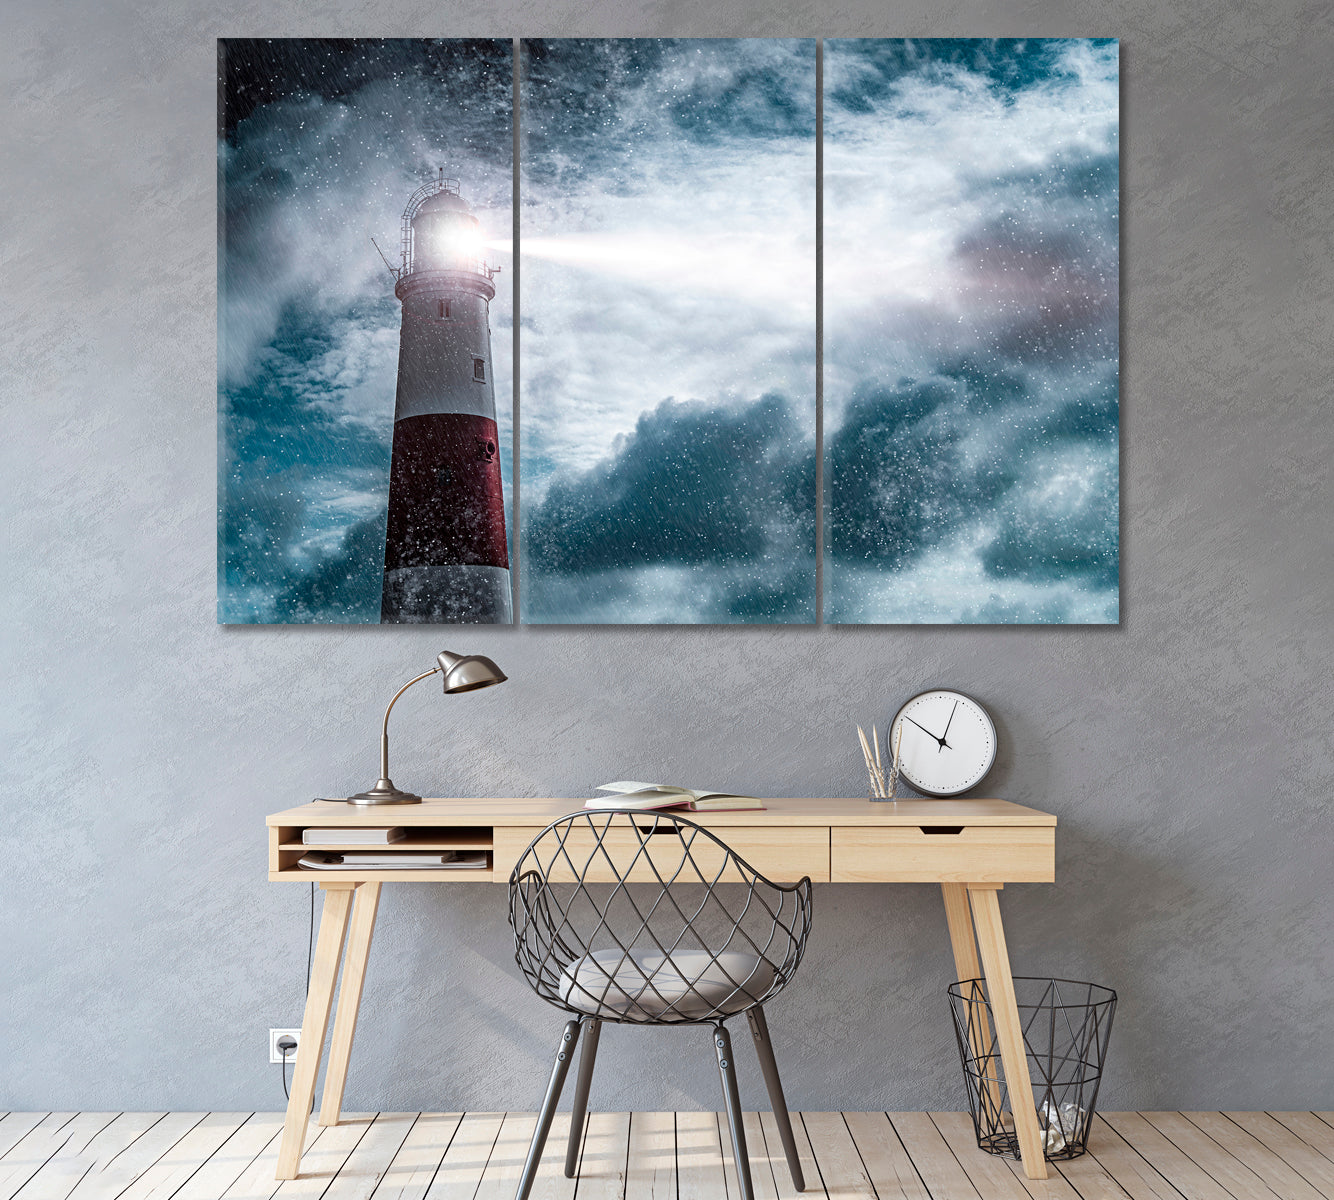 Lighthouse in Storm Shines in Sea Canvas Print ArtLexy 3 Panels 36"x24" inches 